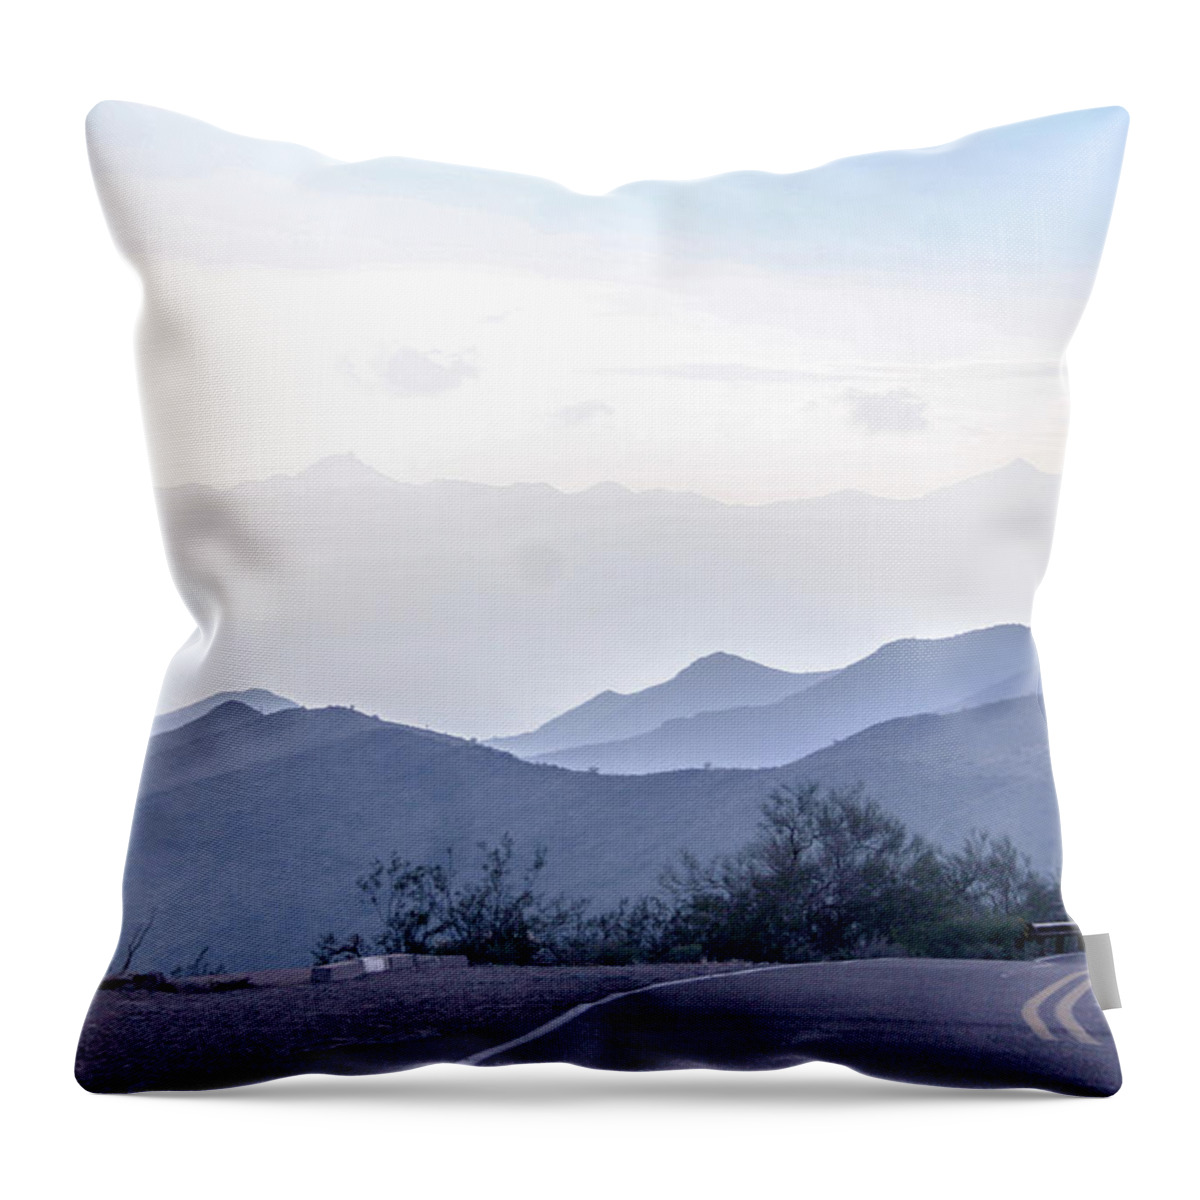 Mountain Throw Pillow featuring the digital art Road to Nowhere by Darrell Foster